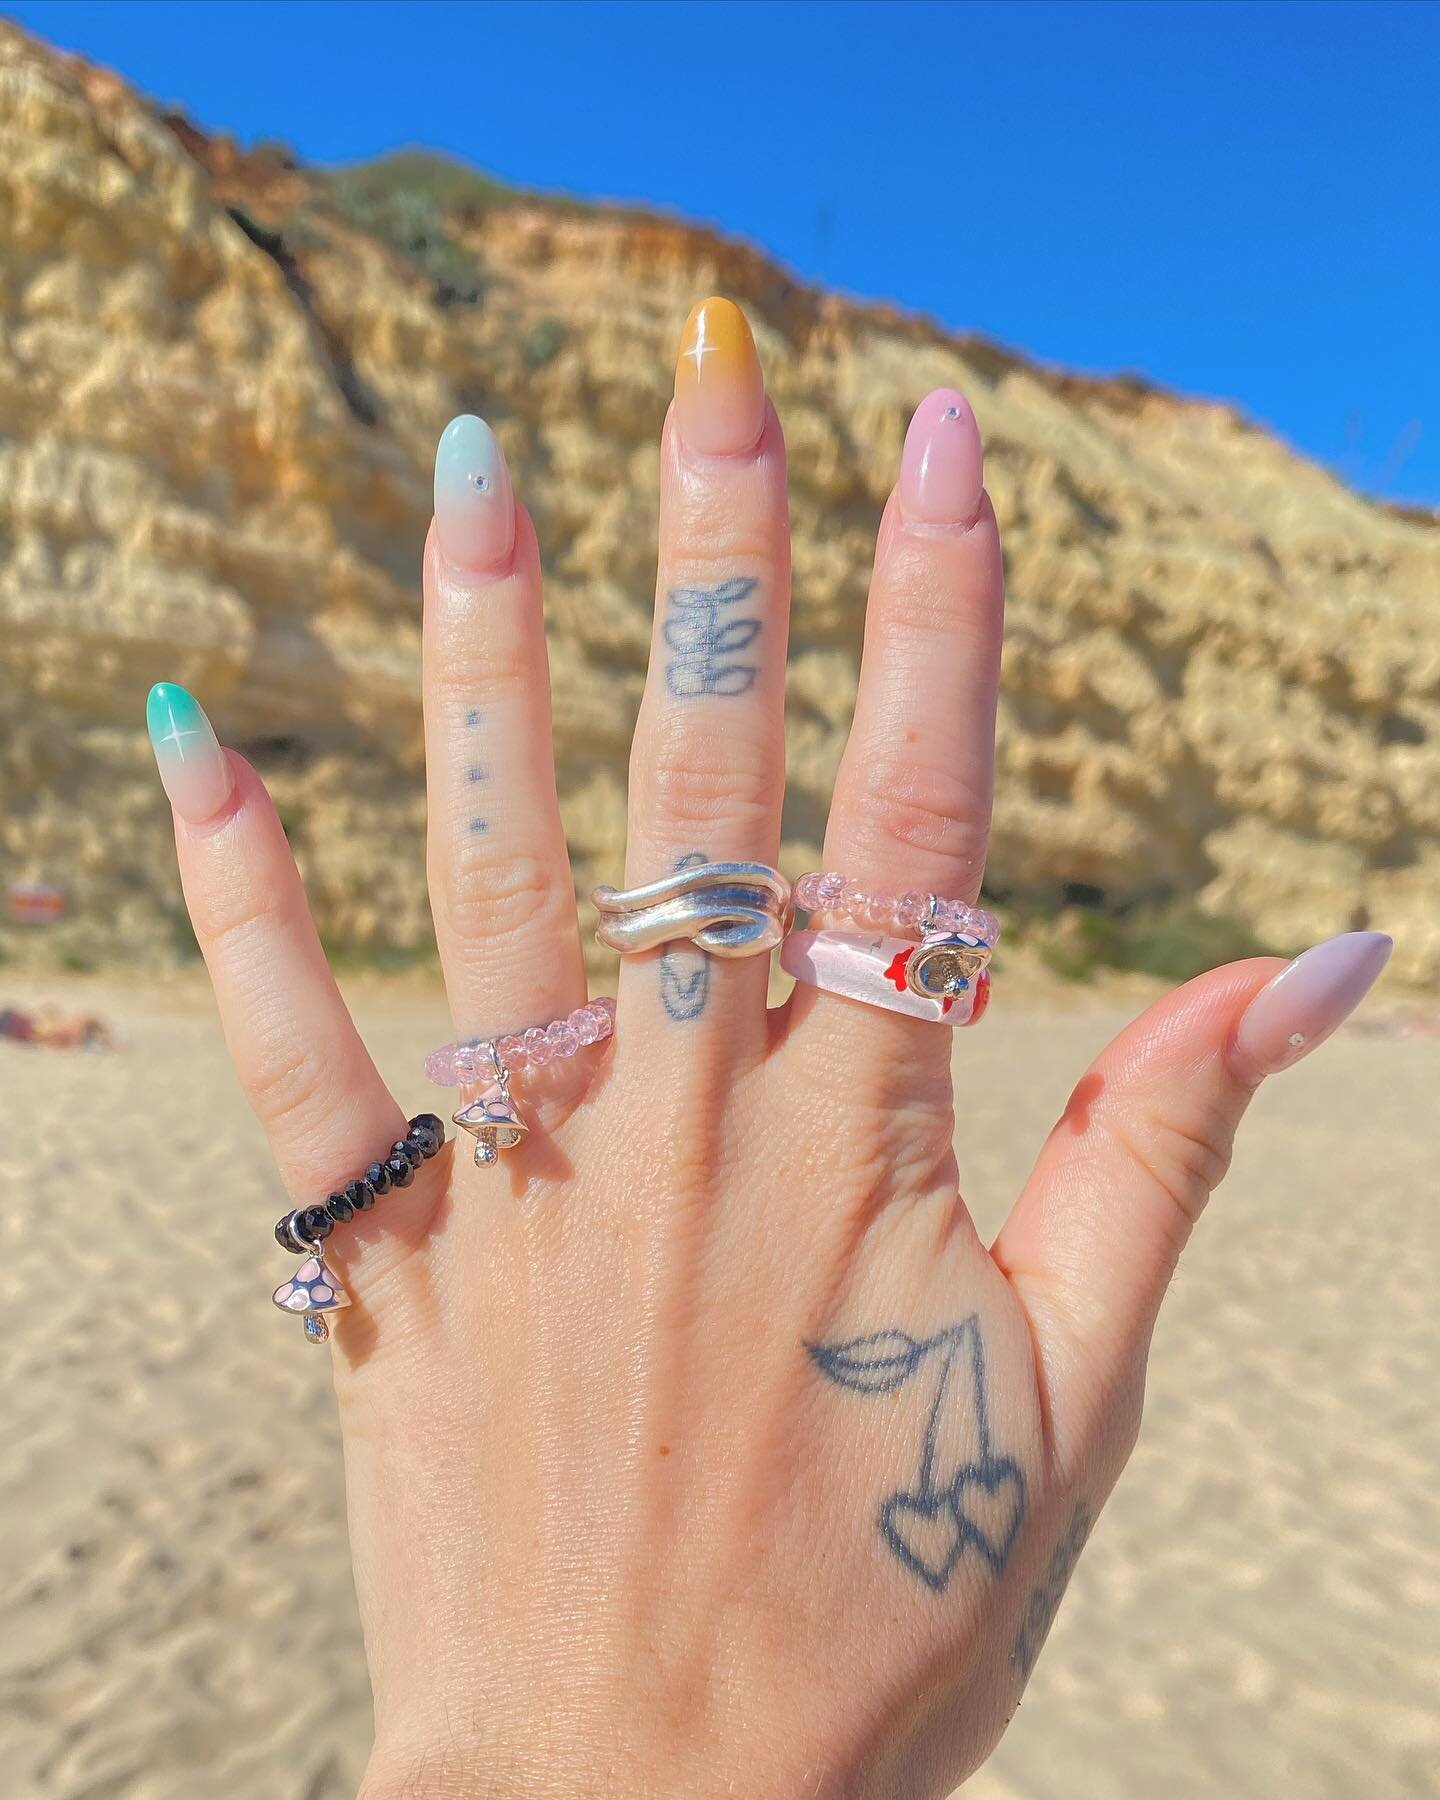 Sweet Summer memories of my trip to Portugal , wearing The Fungi Rings at the beach 🍄🏝️🌊